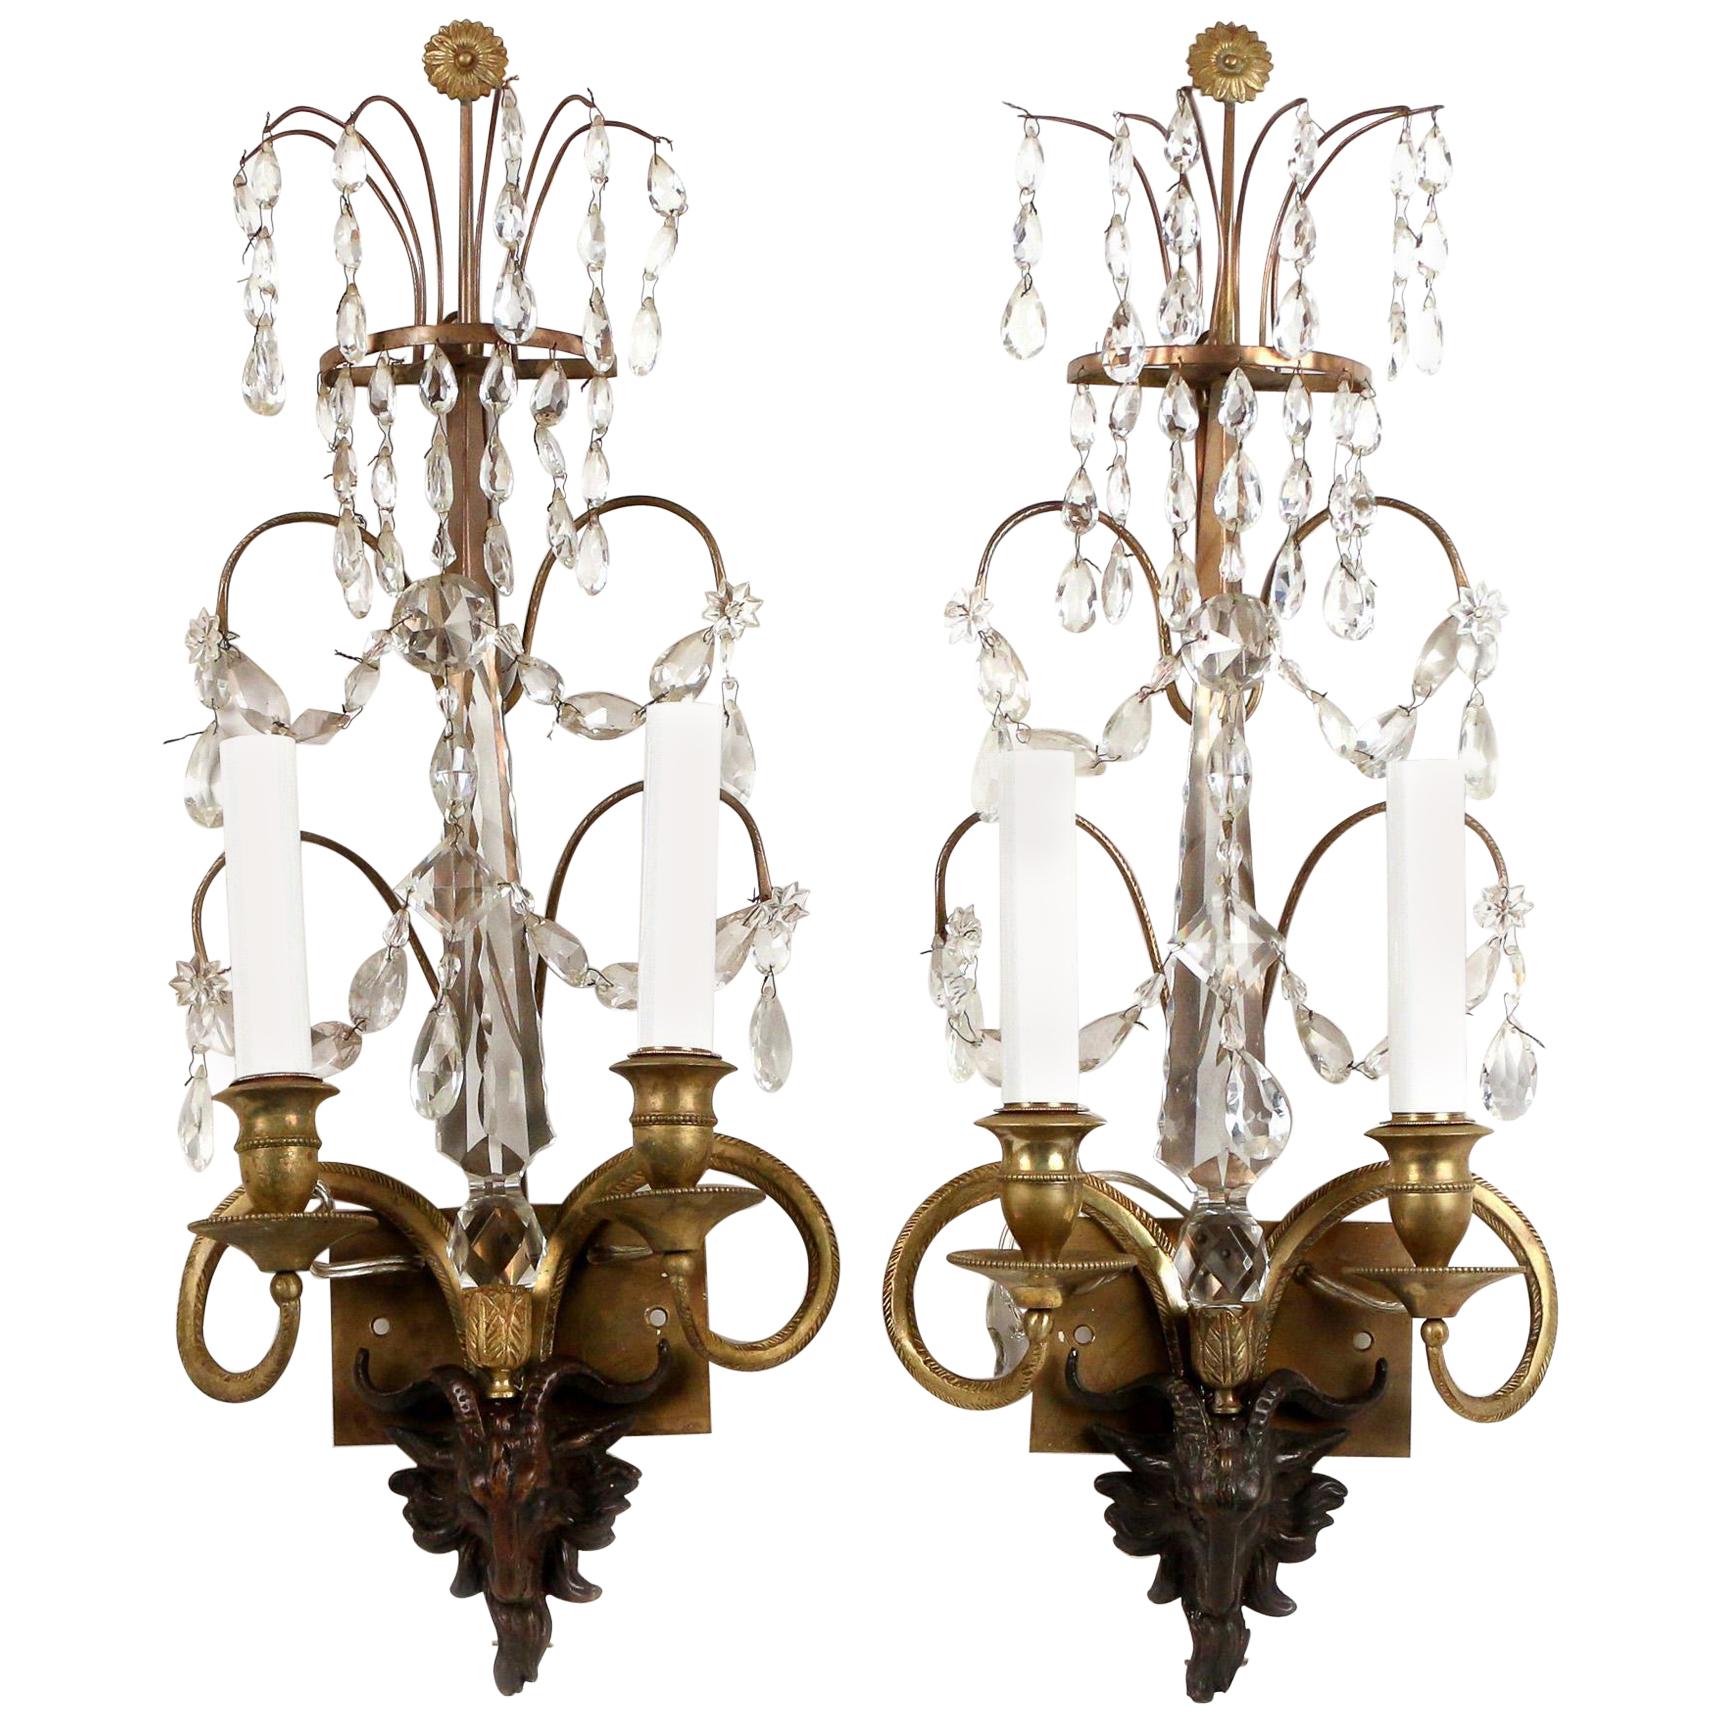 Pair of Neoclassical Bronze and Crystal Sconces